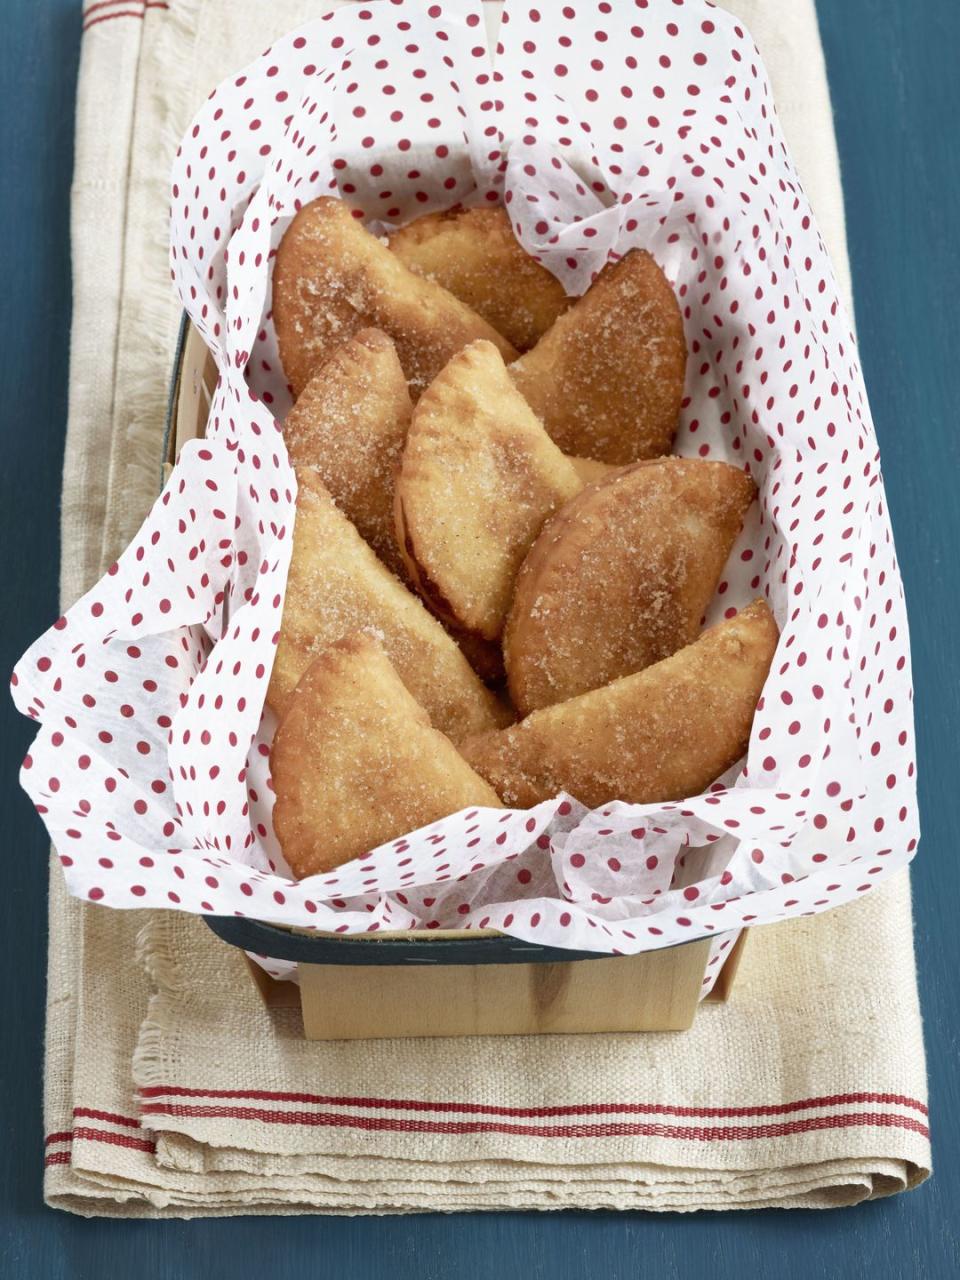 fried peach pies arranged in a parchment lined box